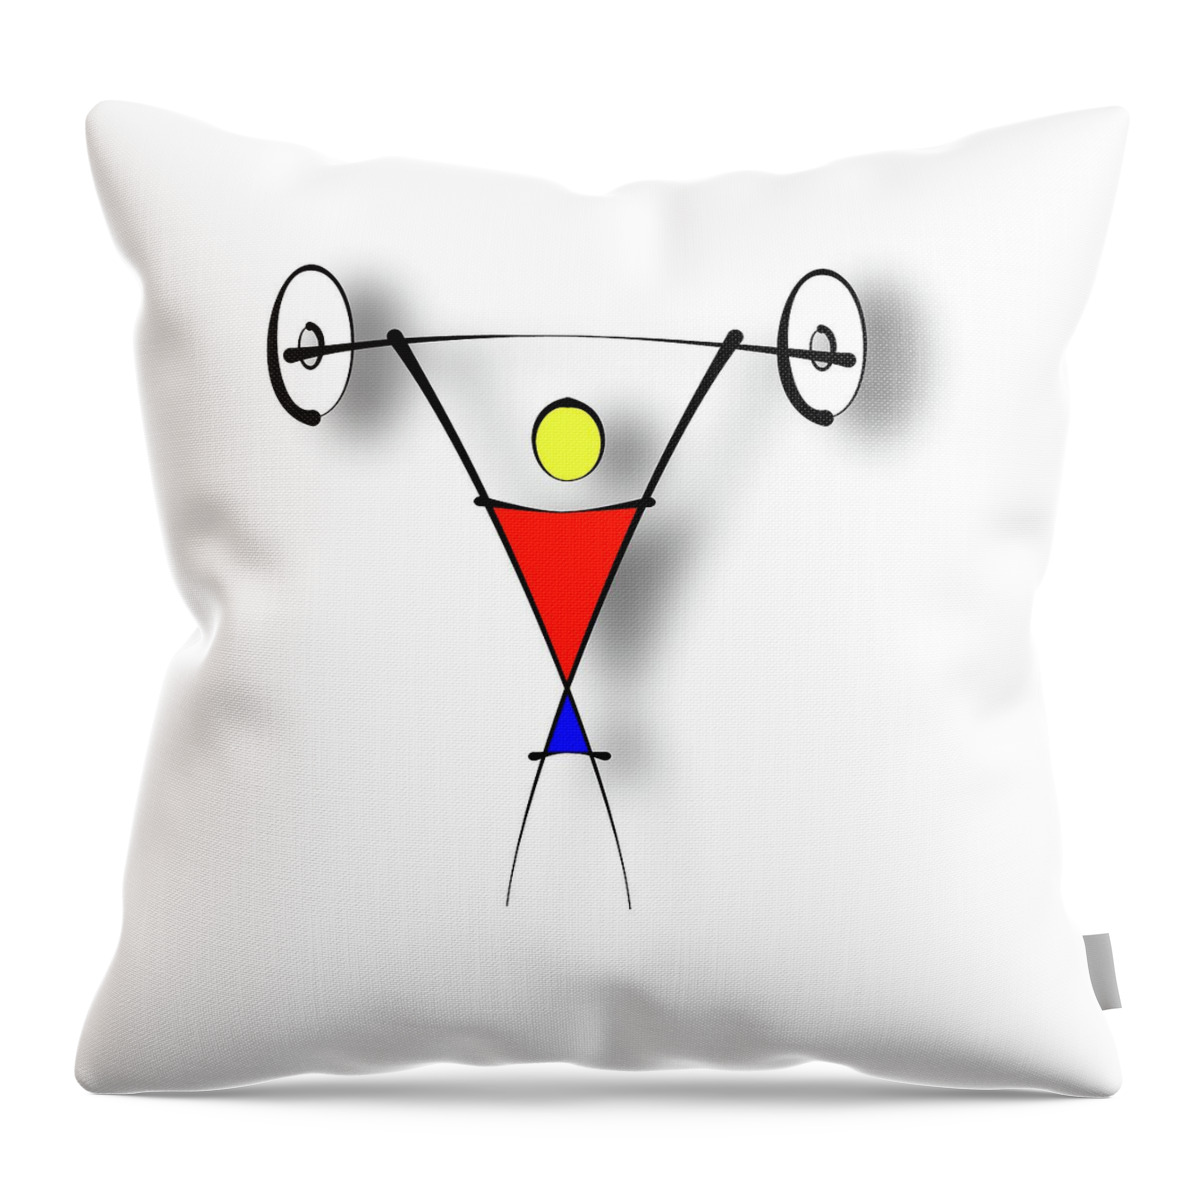 Digital Throw Pillow featuring the digital art Weightlifting by Pal Szeplaky